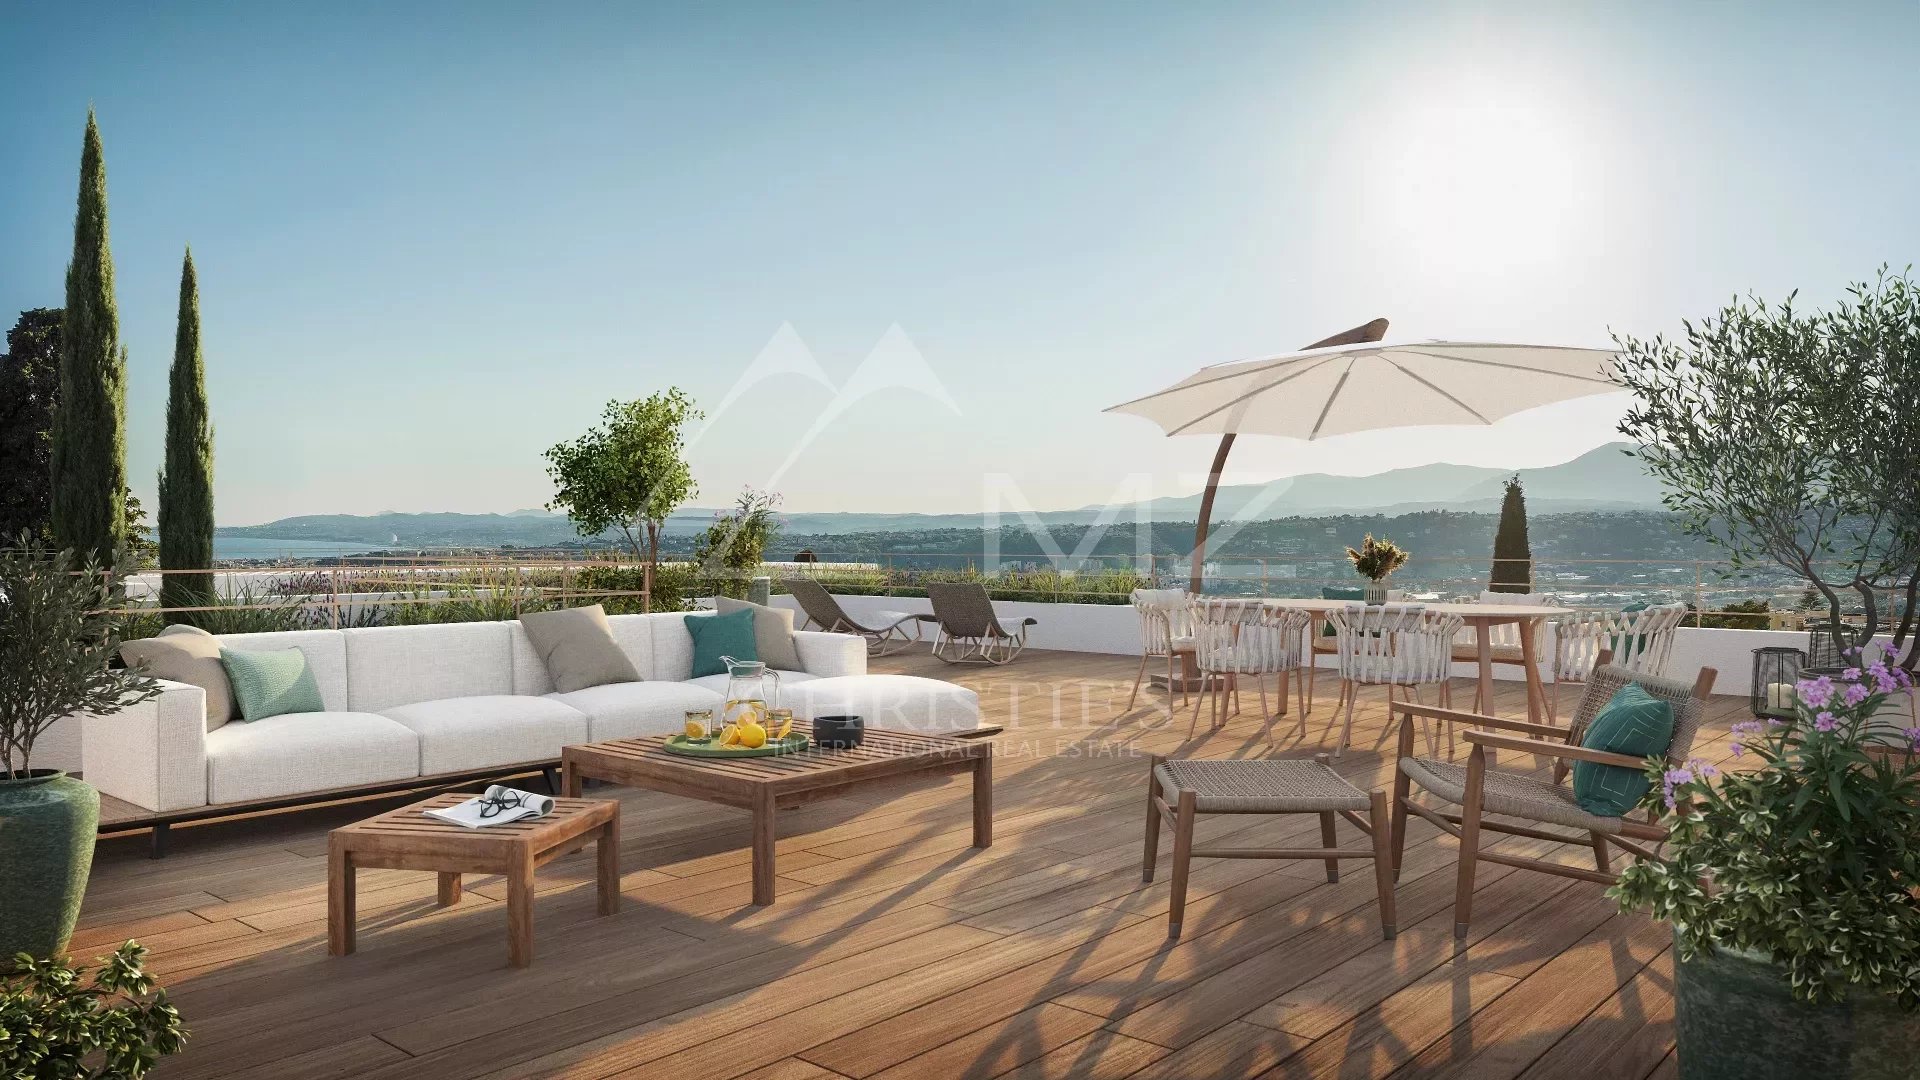 NICE - 3-bedroom Rooftop Terrace with panoramic sea view